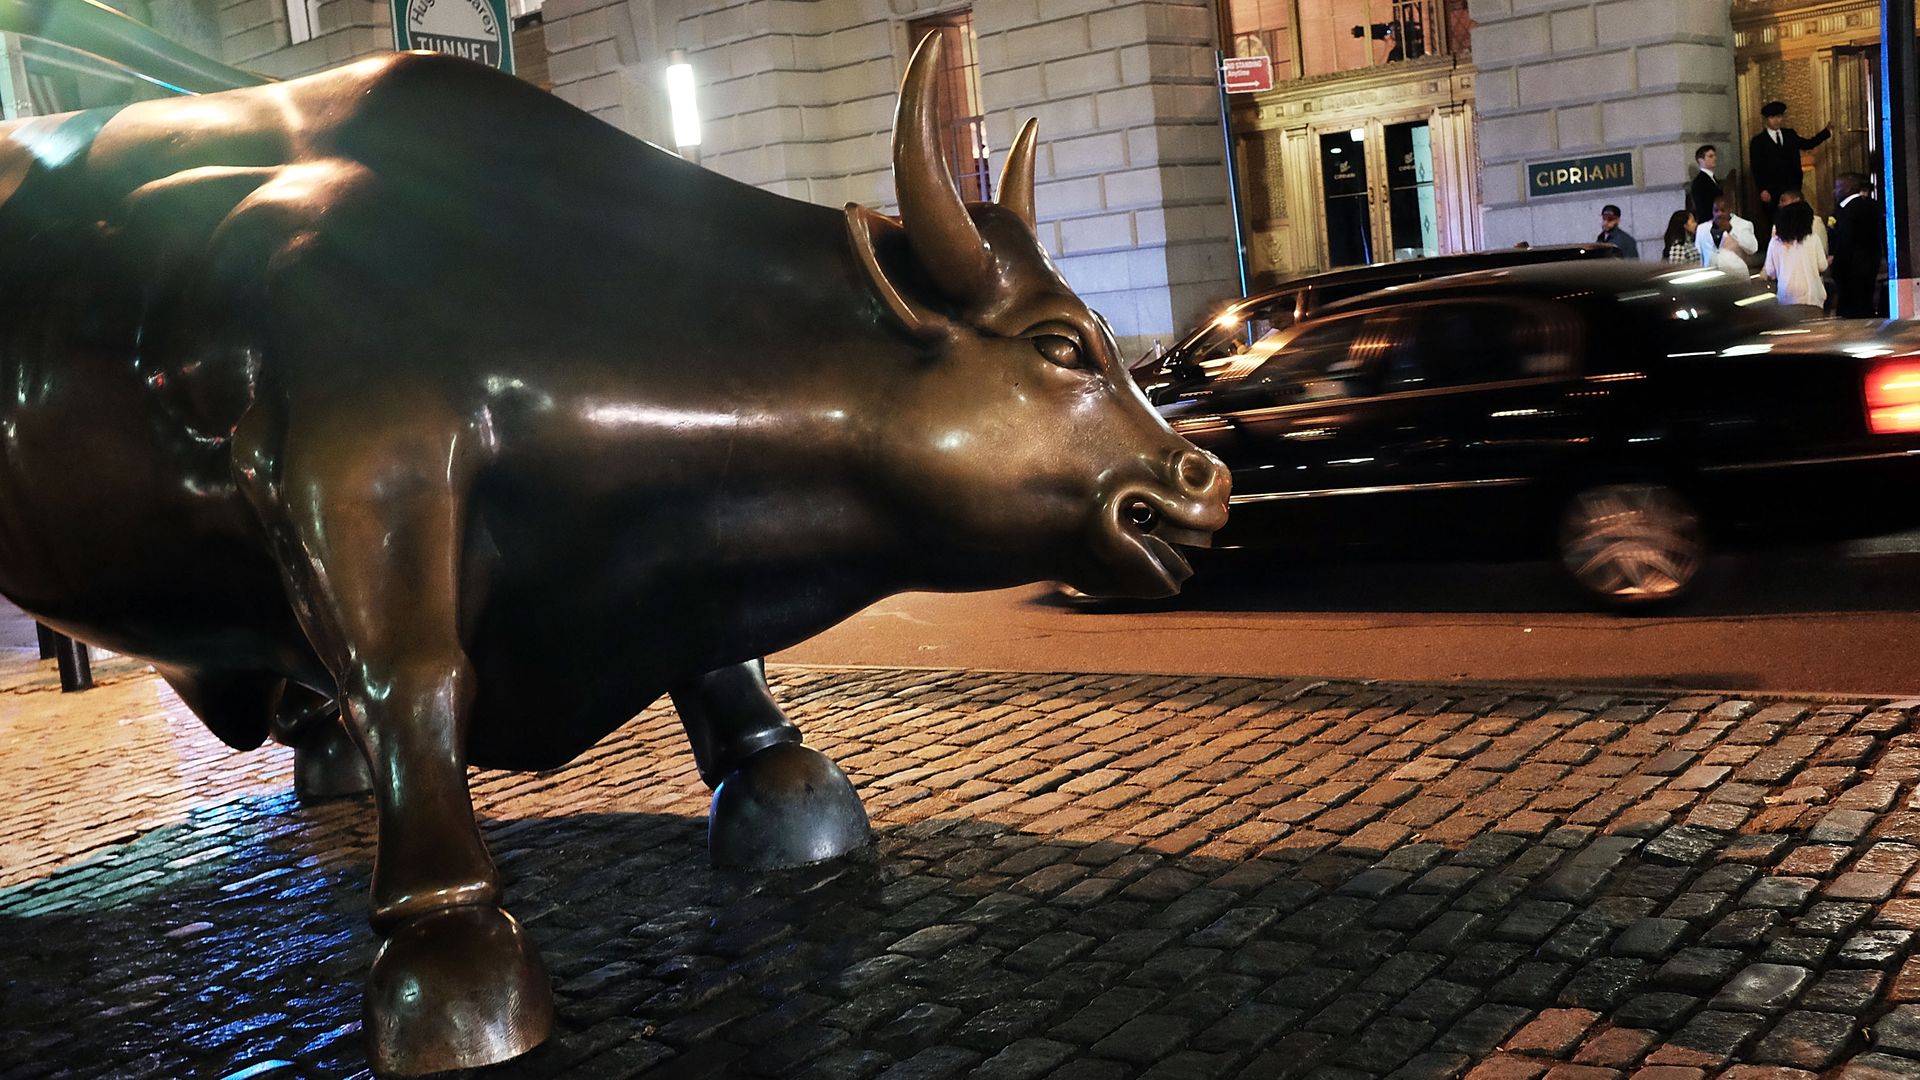 The iconic Wall Street bull.